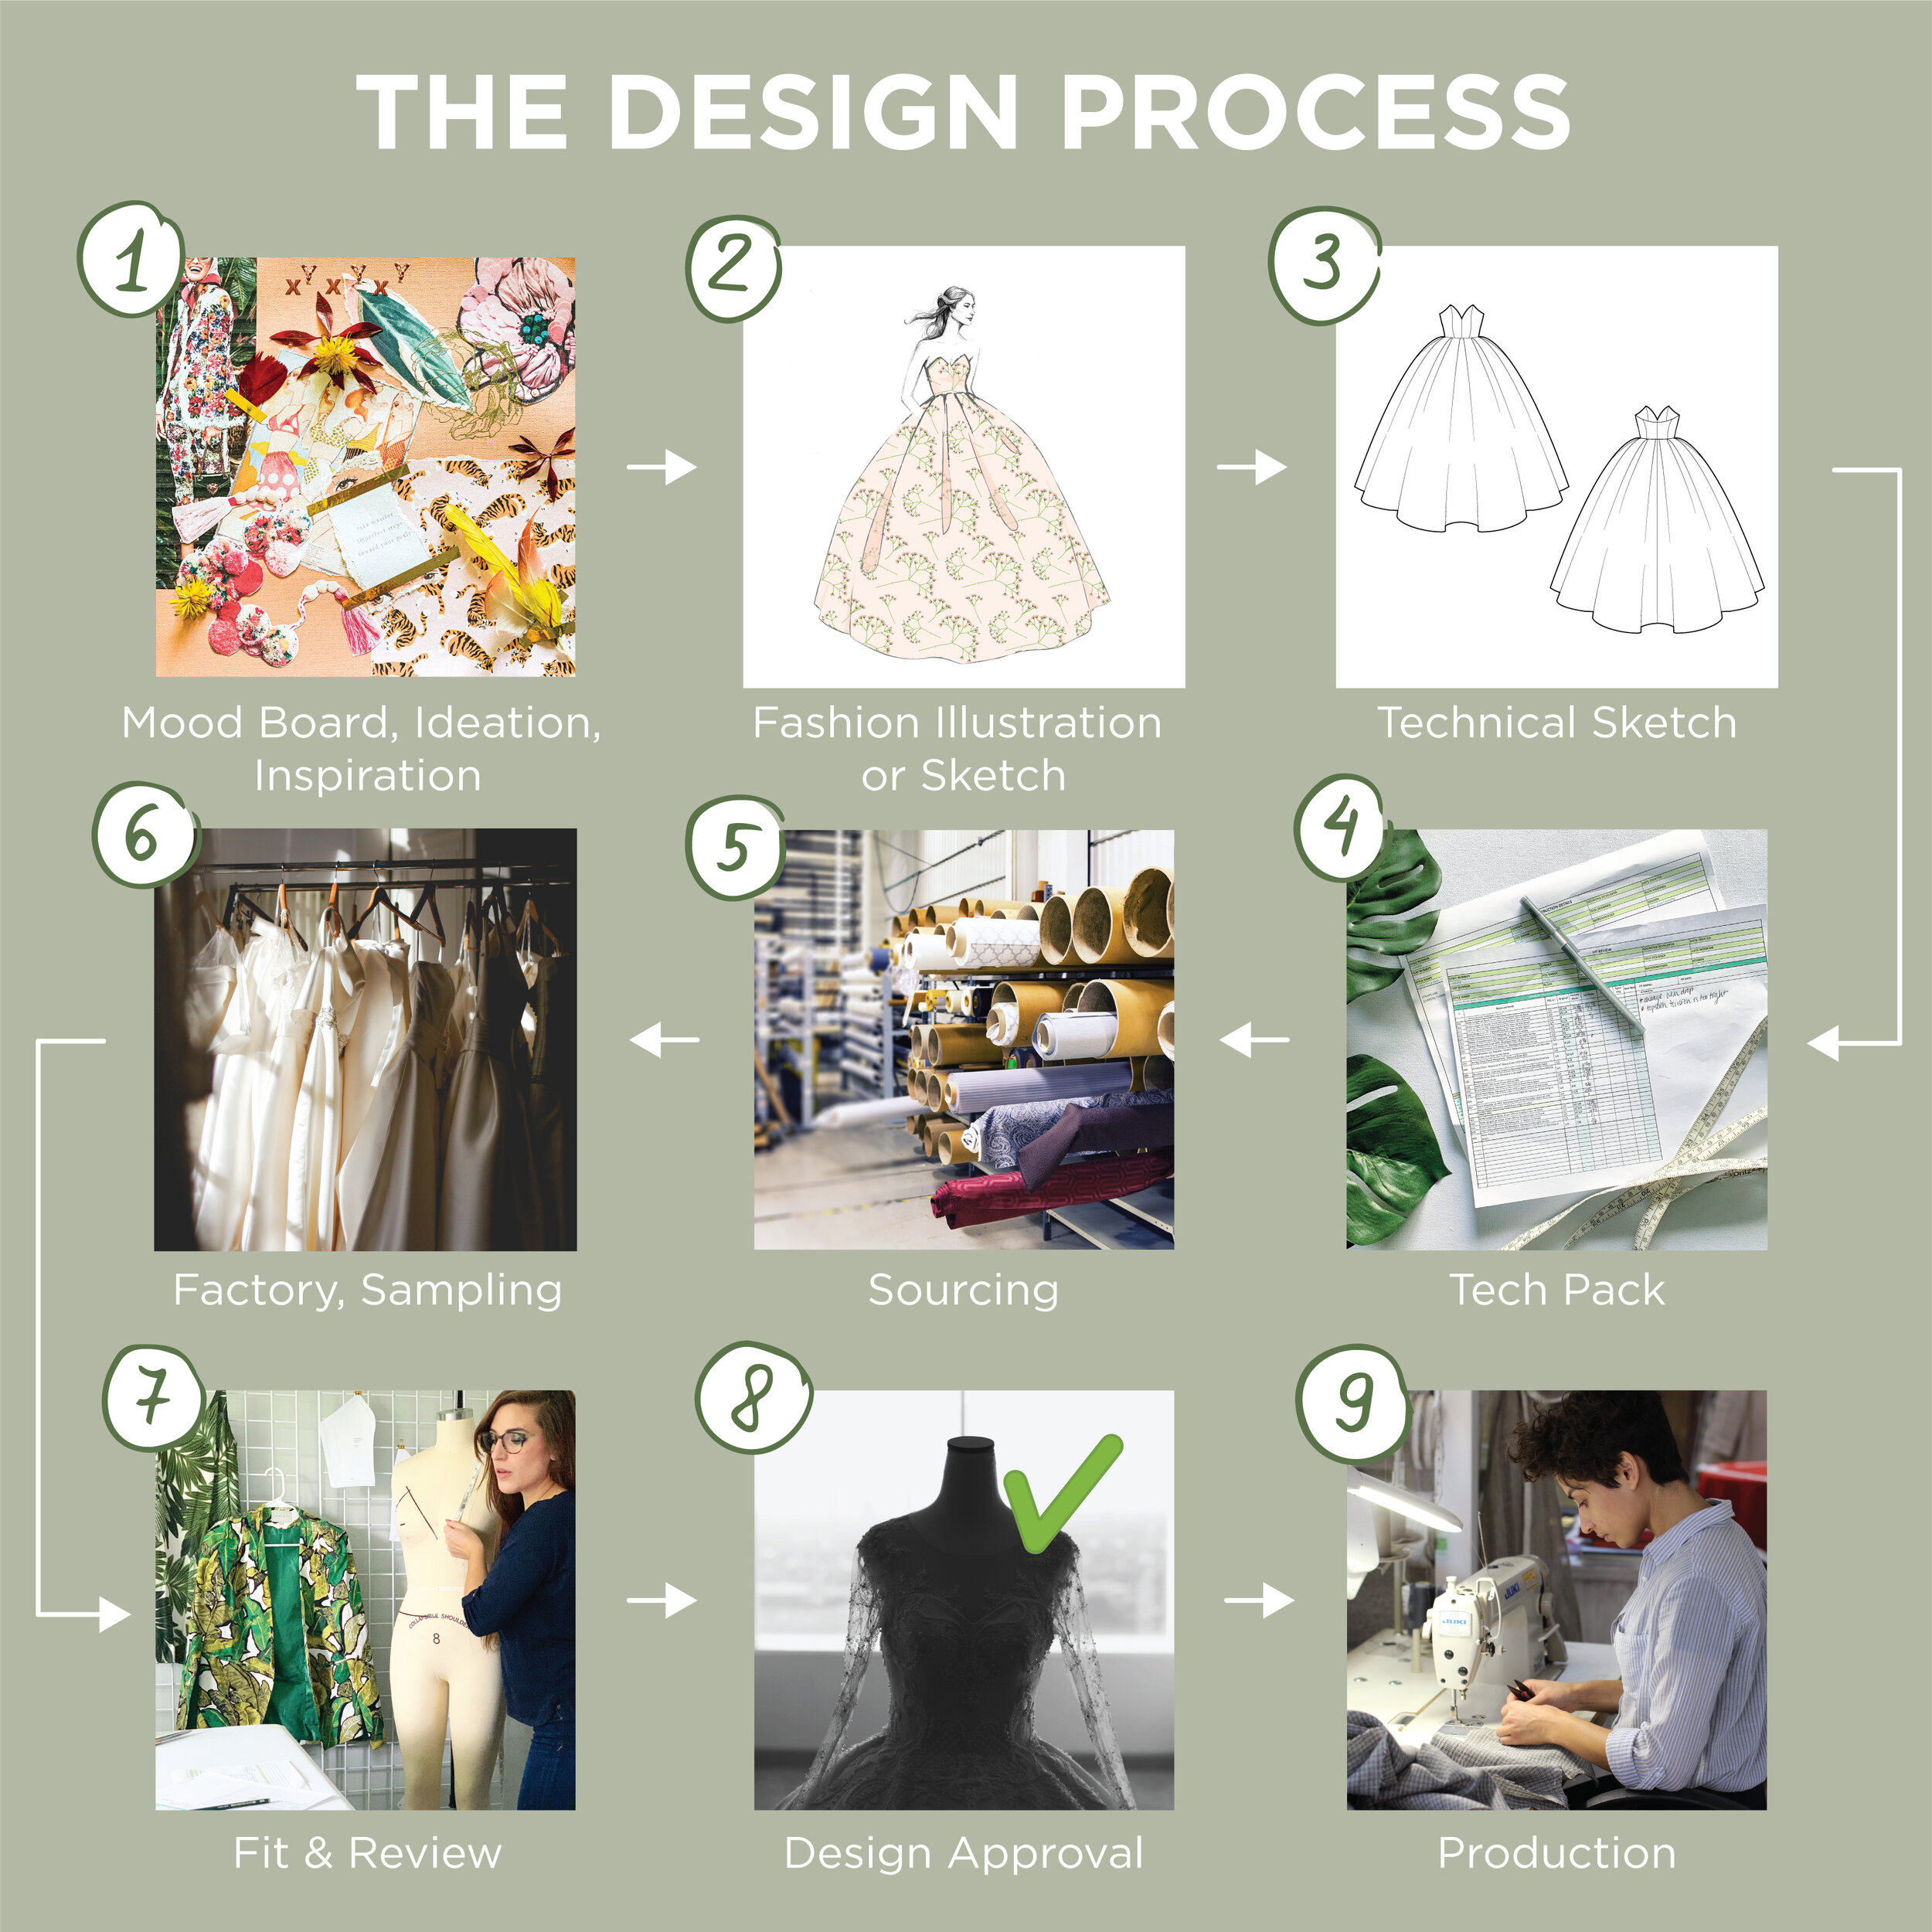 Designer Shares Tips for Creating Your Own Fashion Design Process